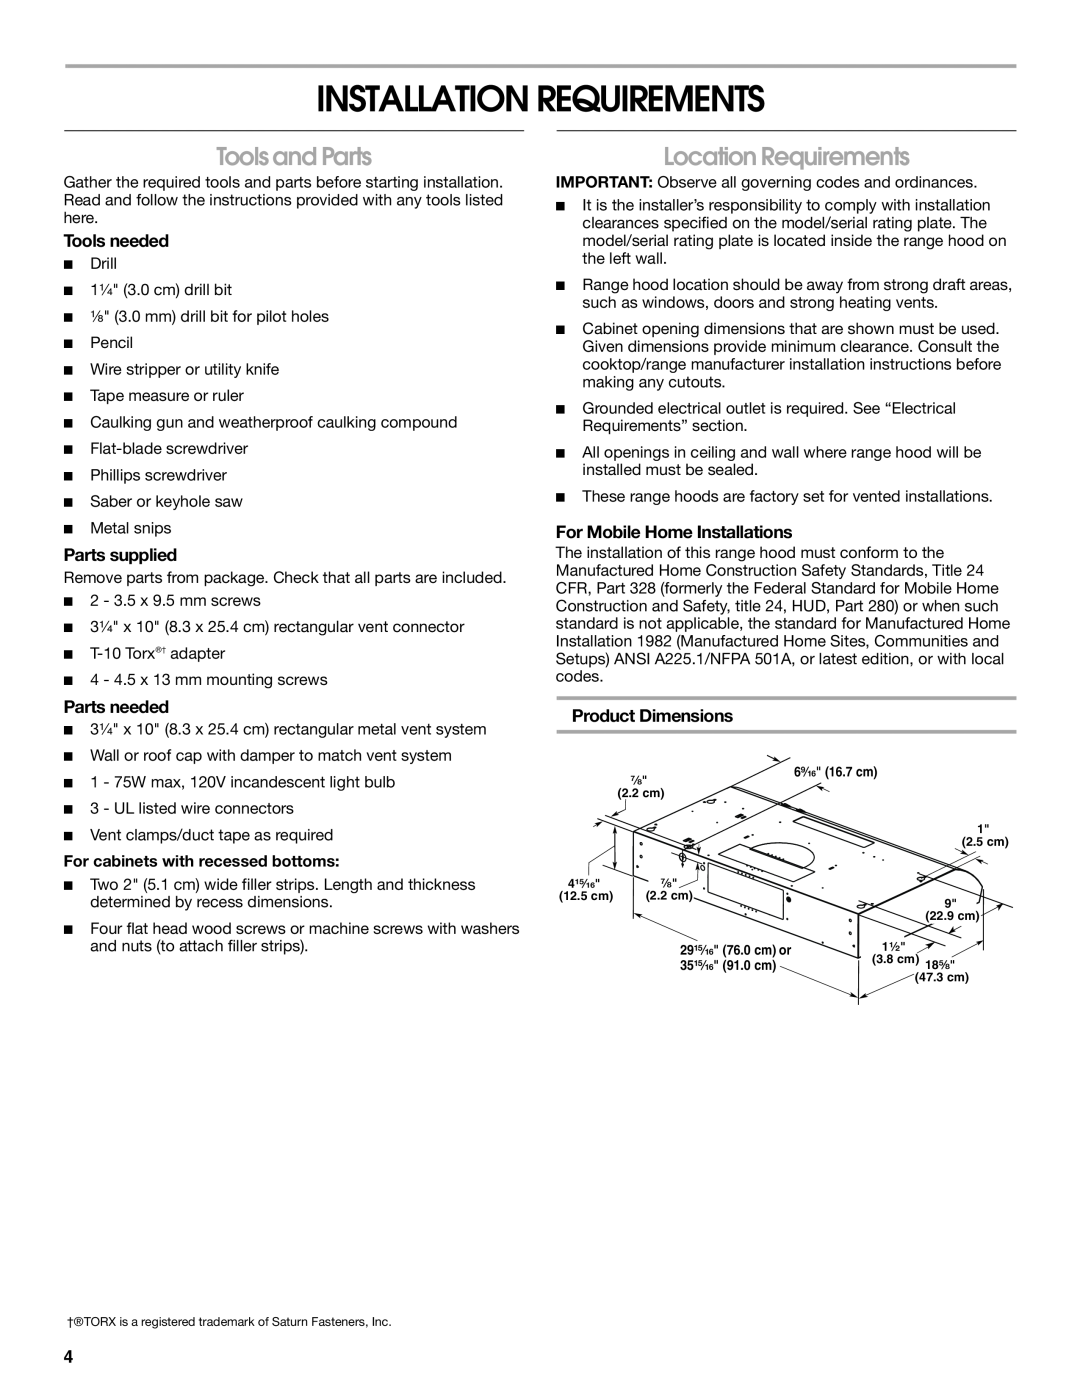 Whirlpool UXT3036AY Installation Requirements, Tools and Parts, Location Requirements, Tools needed, Parts supplied 